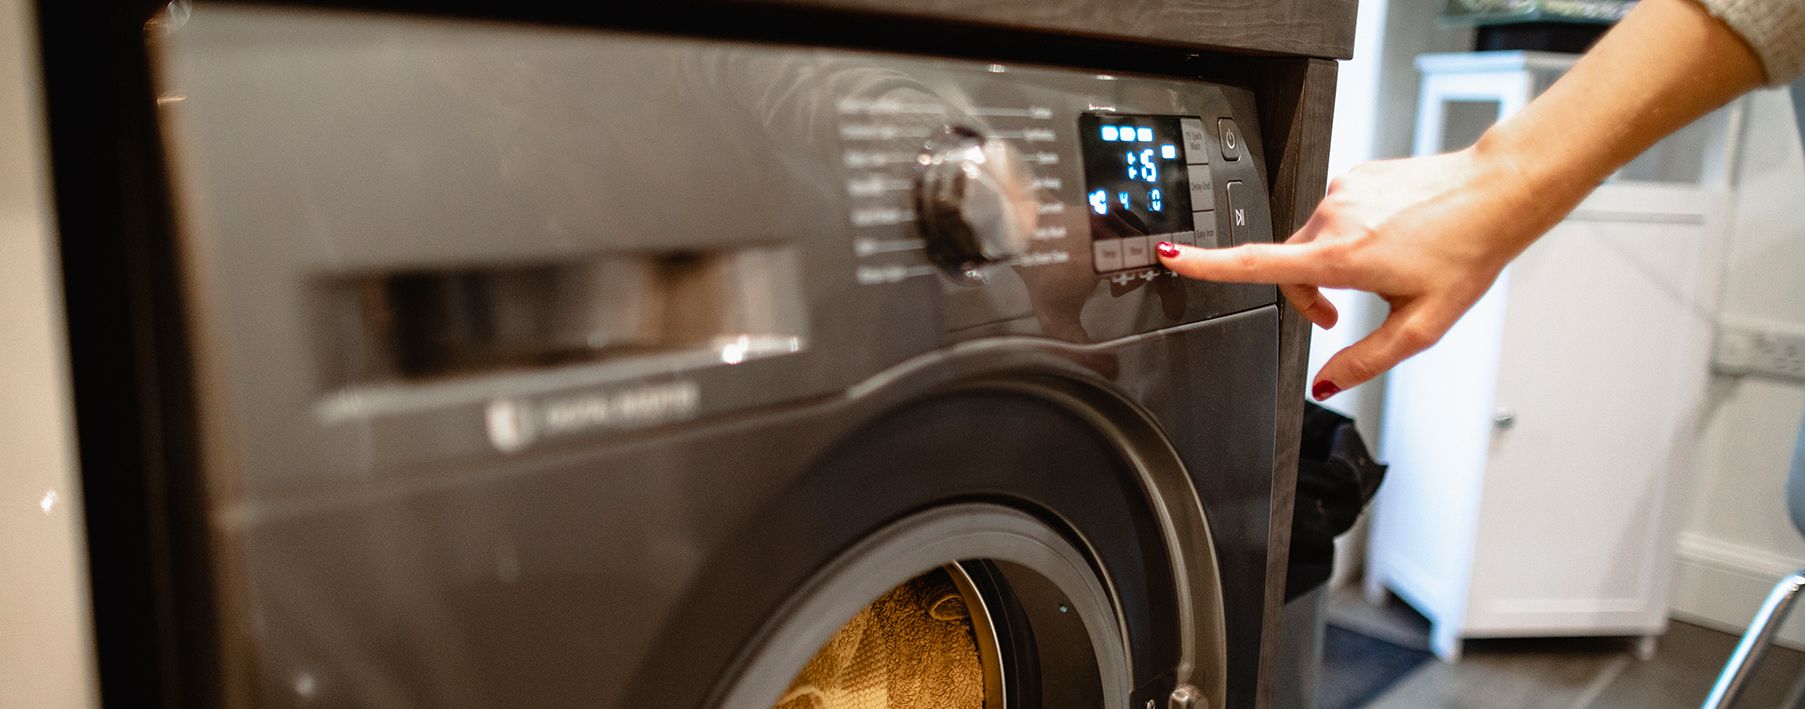 A woman's hand touching buttons on a washing machine